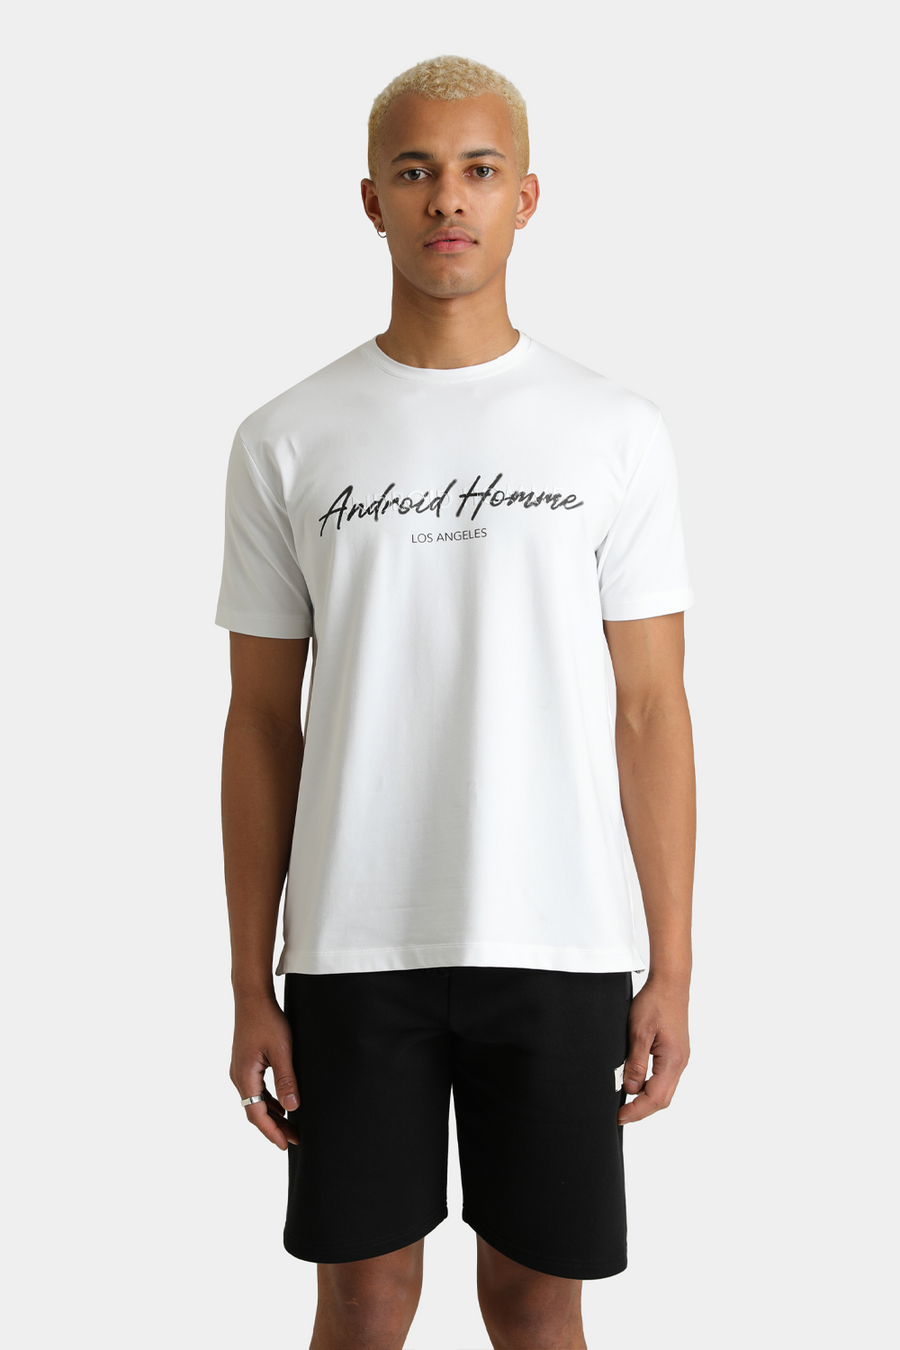 Buy the Android Homme Blur Script T-Shirt in White at Intro. Spend £50 for free UK delivery. Official stockists. We ship worldwide.